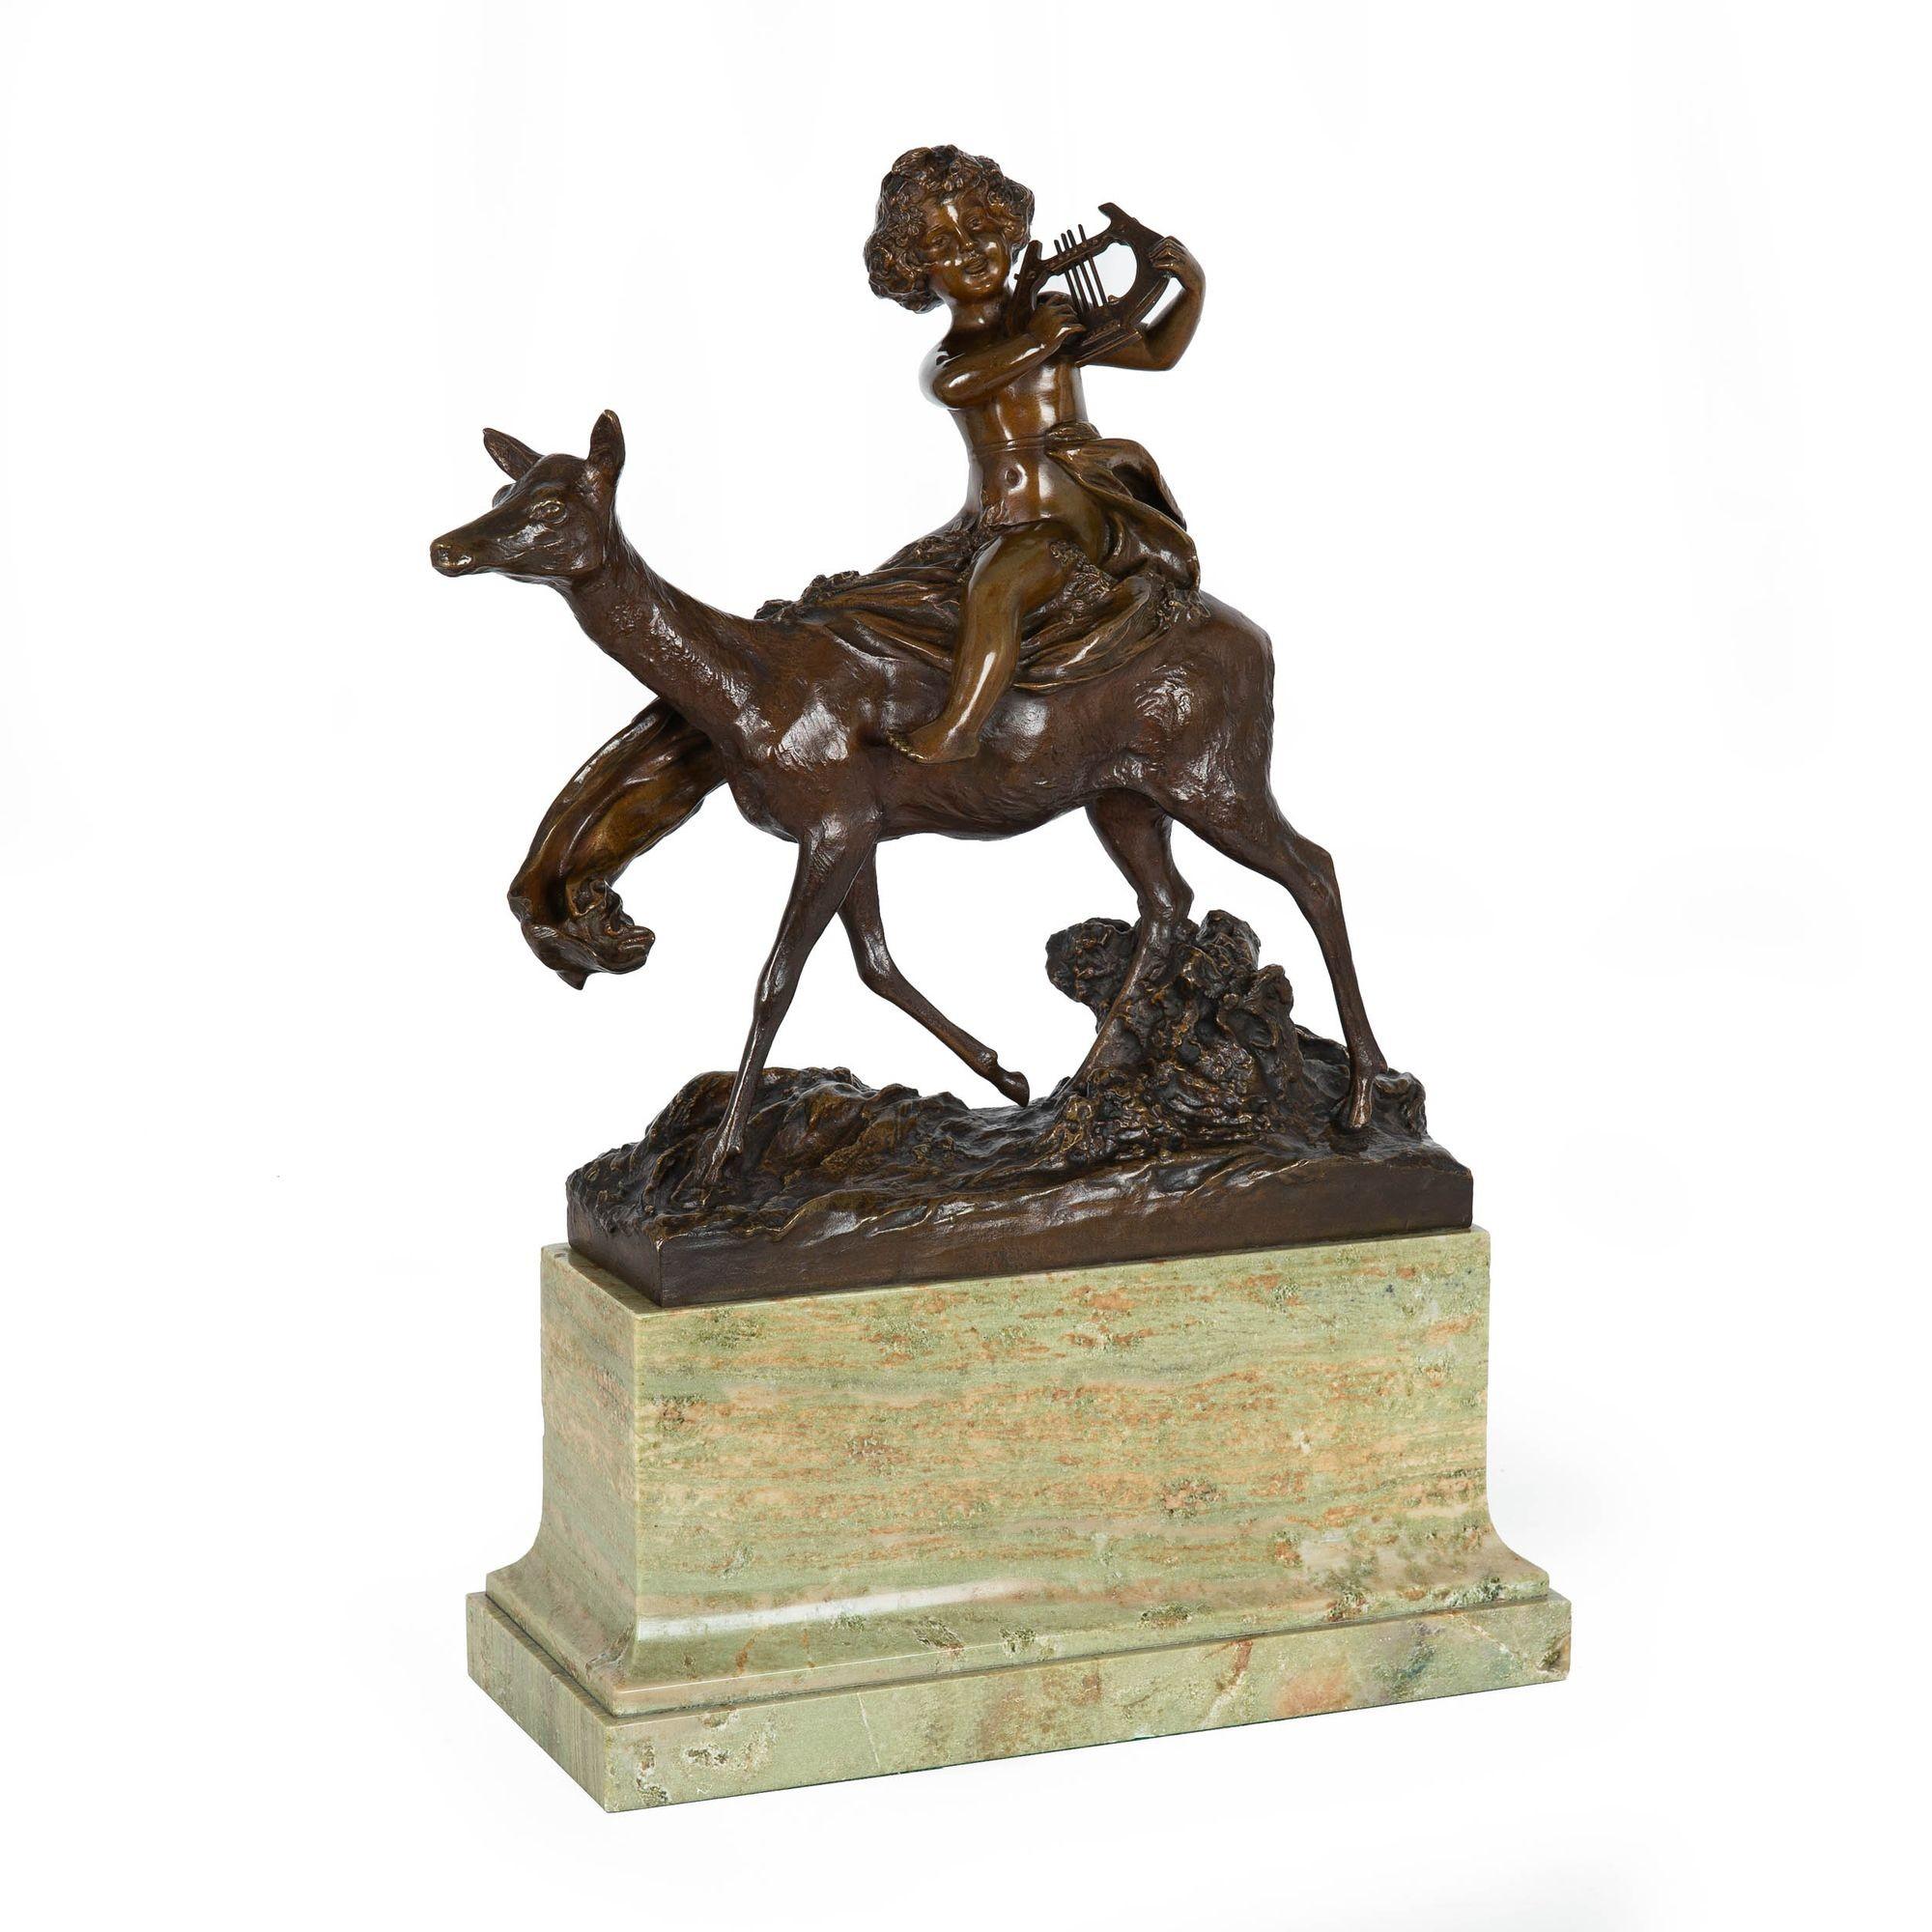 A very fine lifetime casting of Charles Korschann's Putto Riding a Doe, the model is steeped in the elements of the Art Nouveau with a distinct celebration of the naturalistic. The putto grasps a simple harp in his hand while a loose garment bound